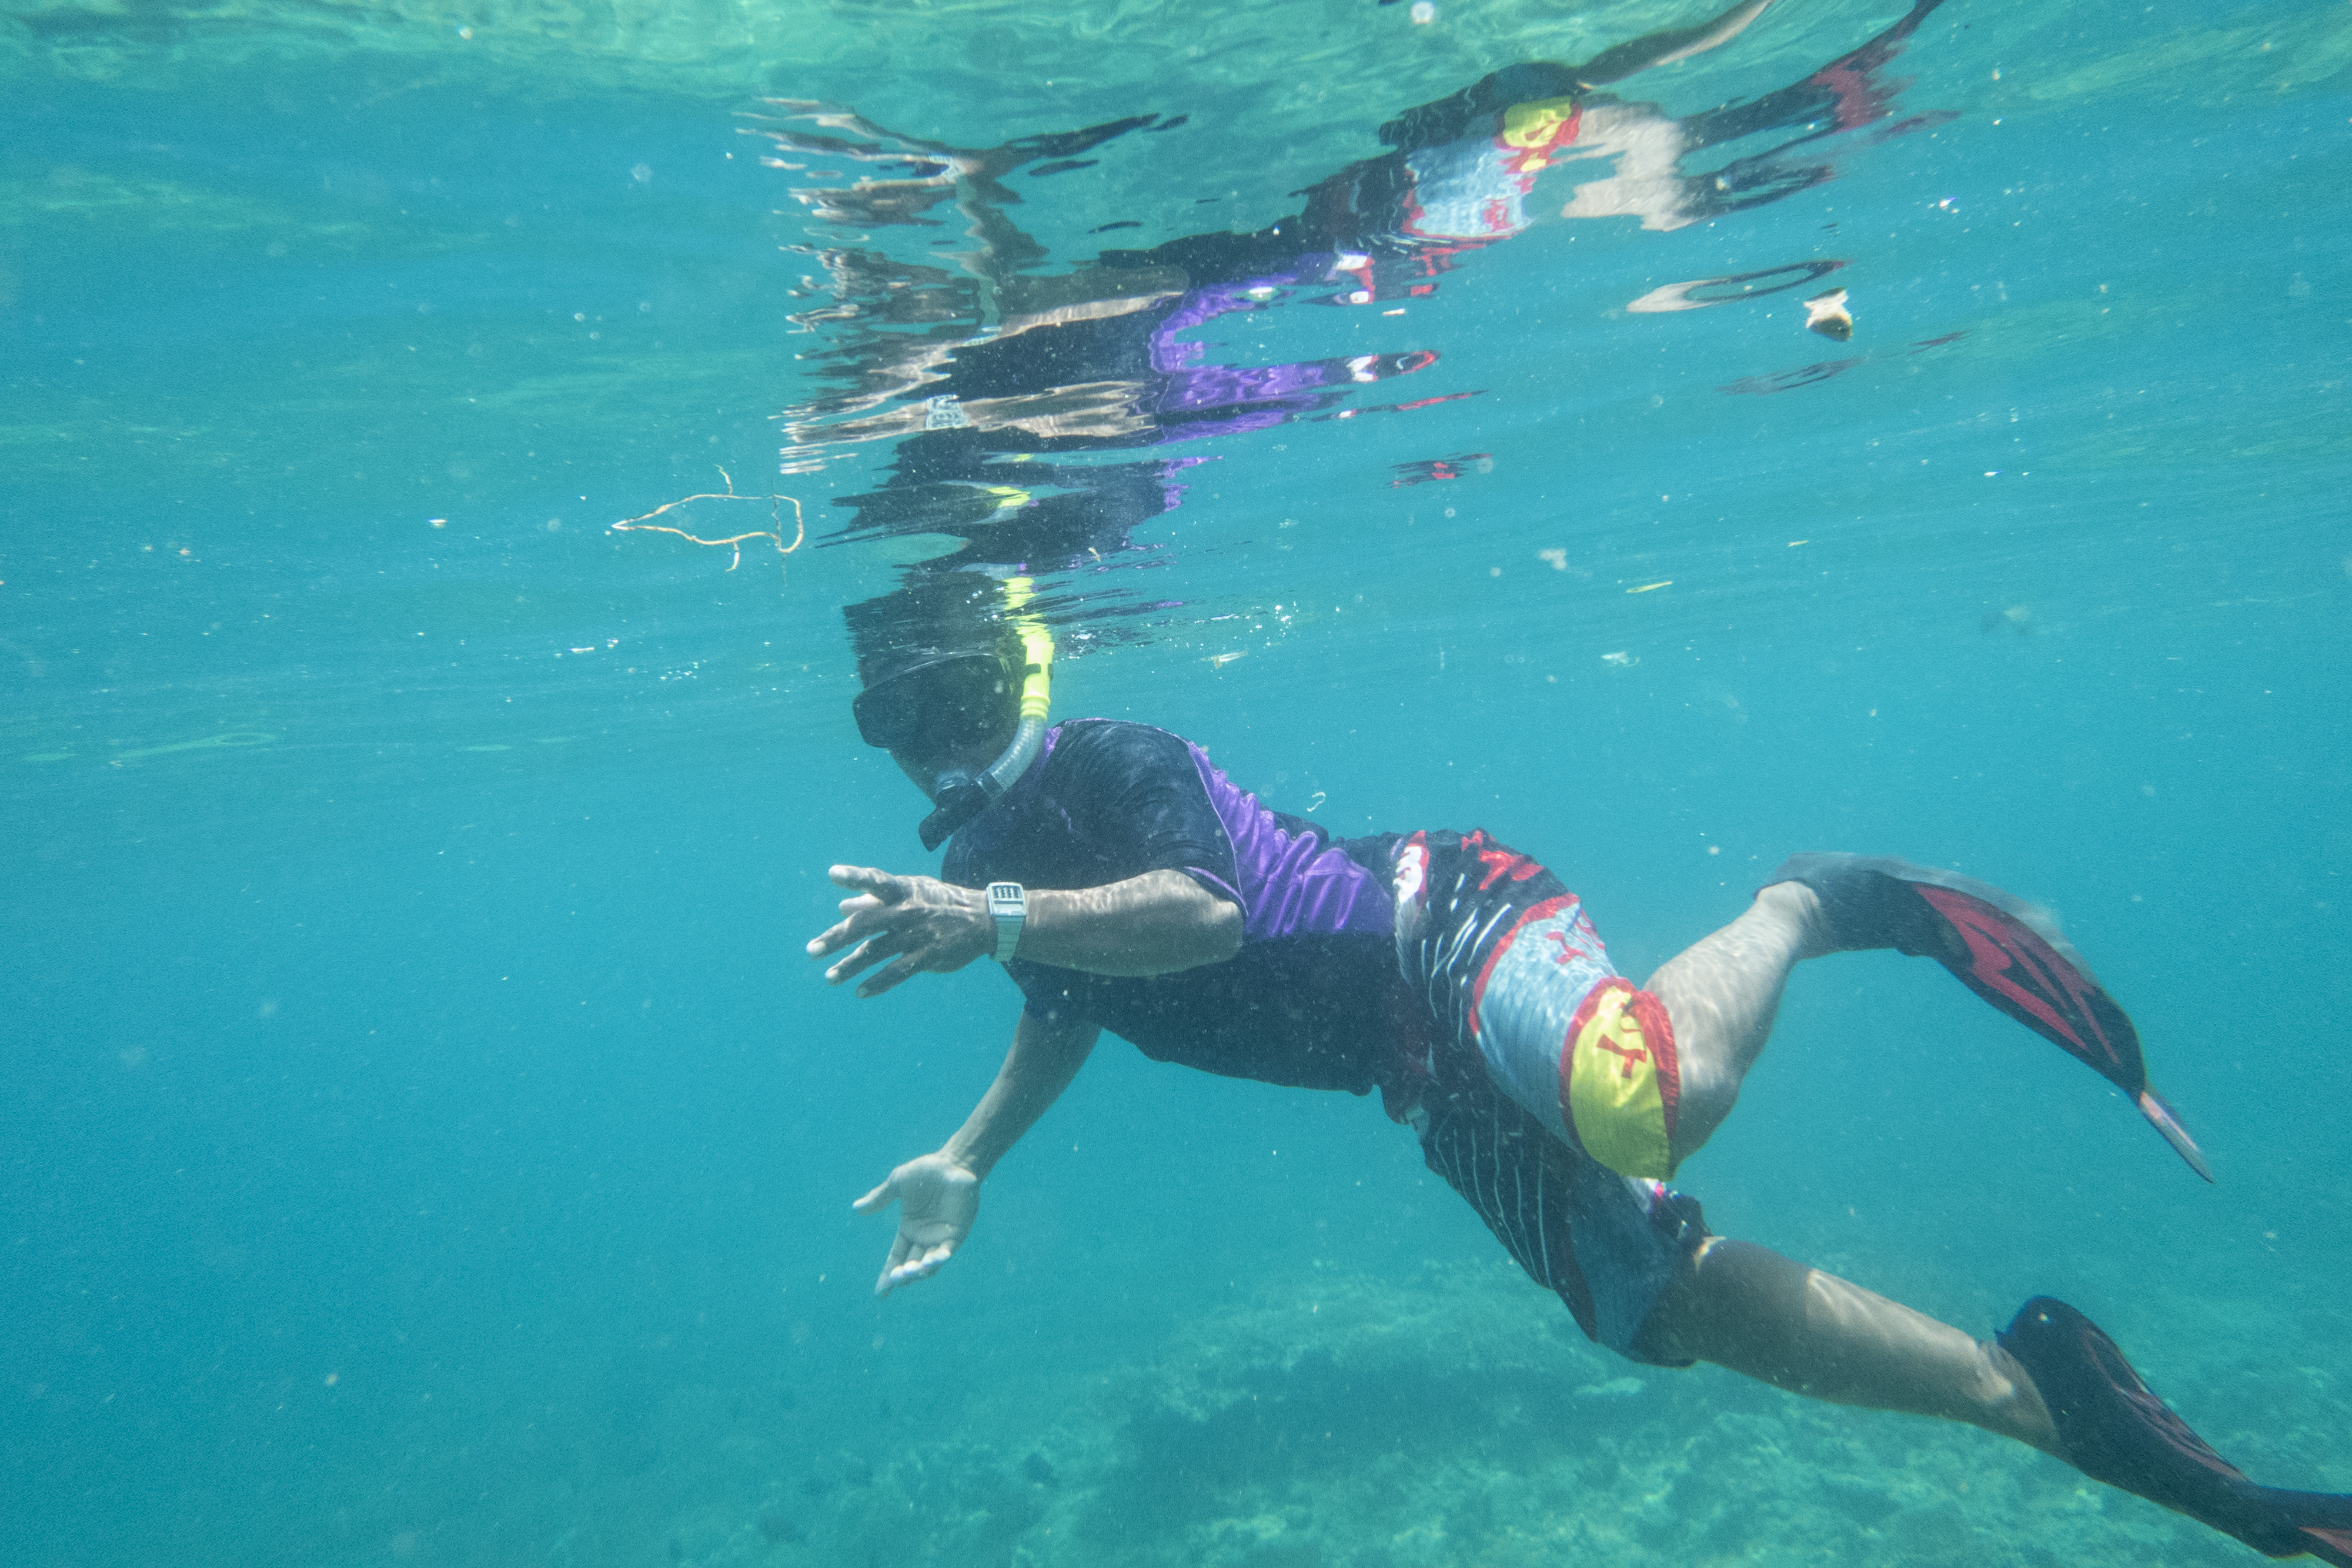 Don't know what to see? Suhardi will take you to where the best corals are.